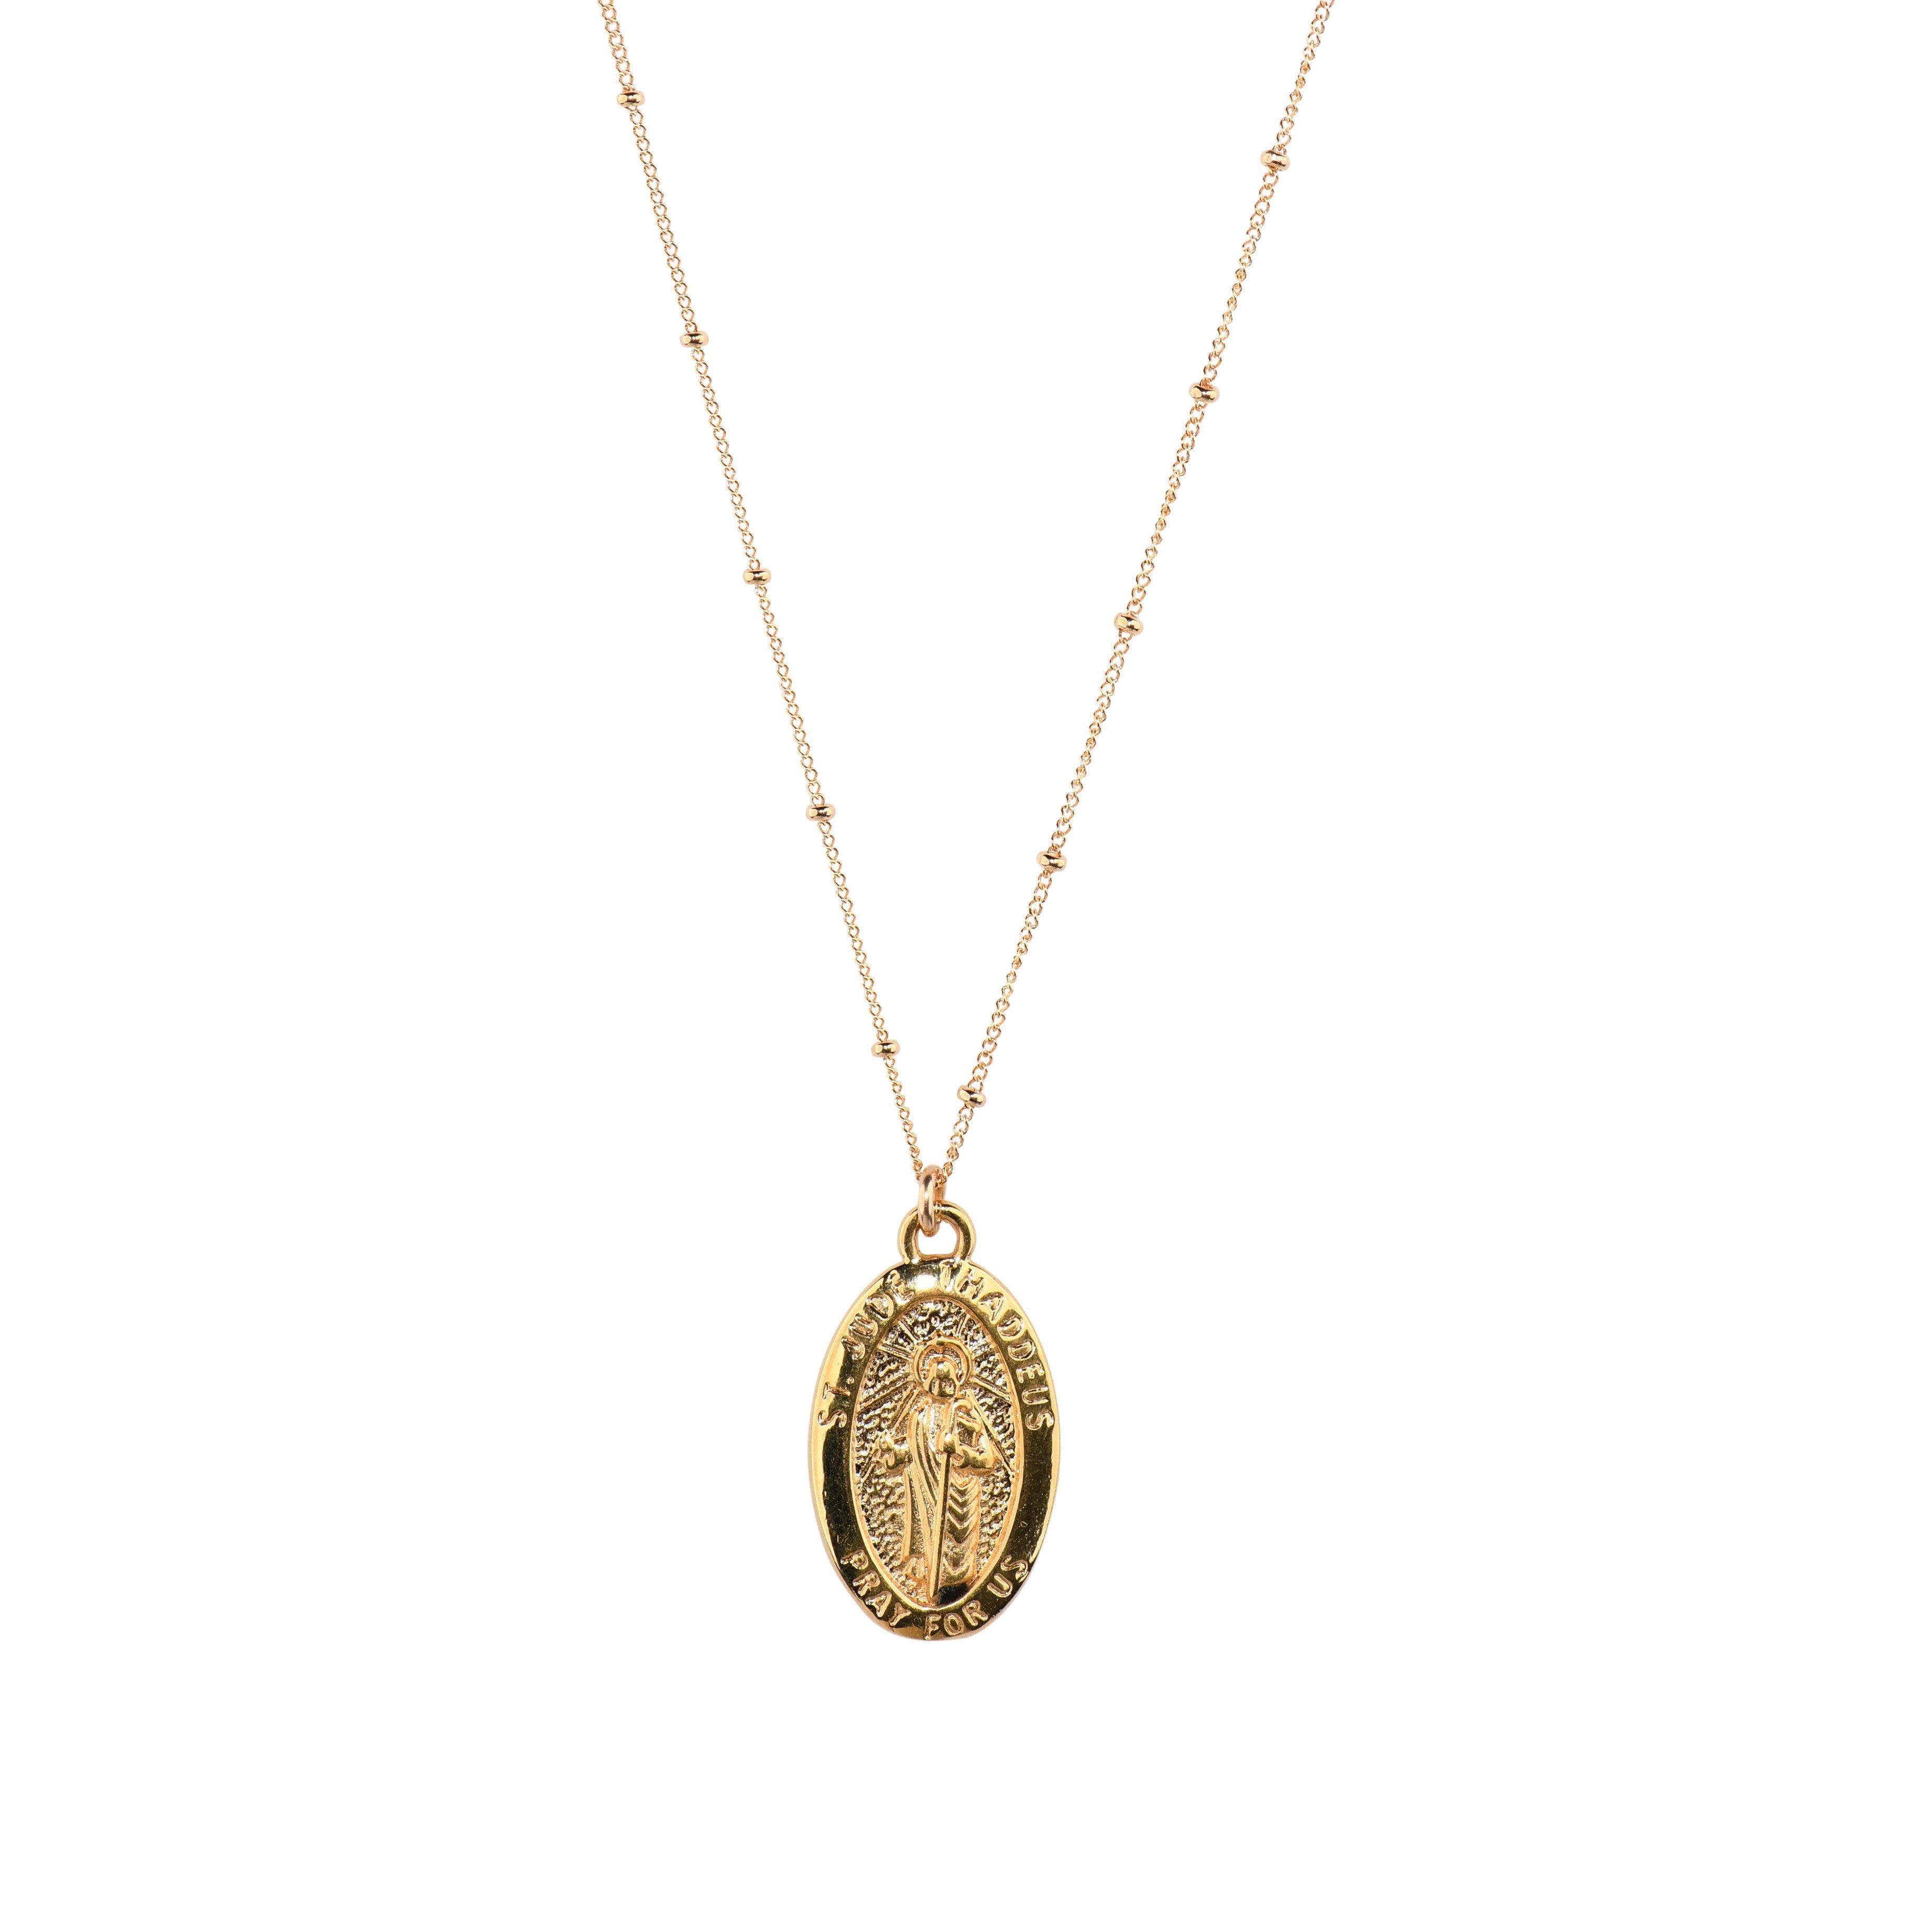 Saint Jude Pendant Necklace in Gold (Yellow/Rose/White)